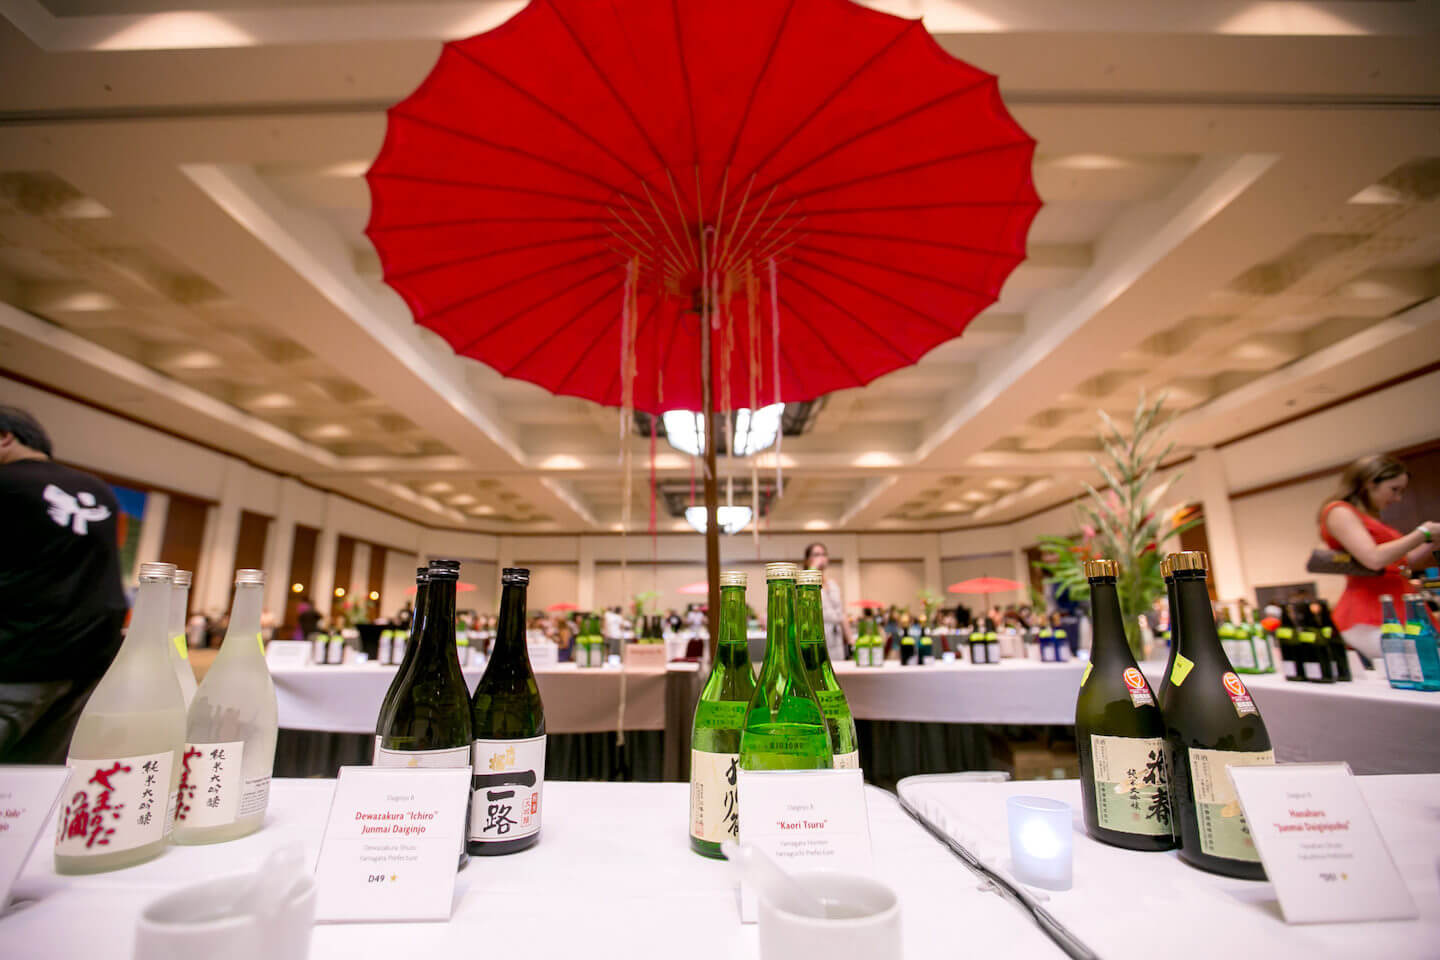 Sake bottles on the table with a large Japanese red umbrella behind inside of a ballroom (2015 Honolulu)